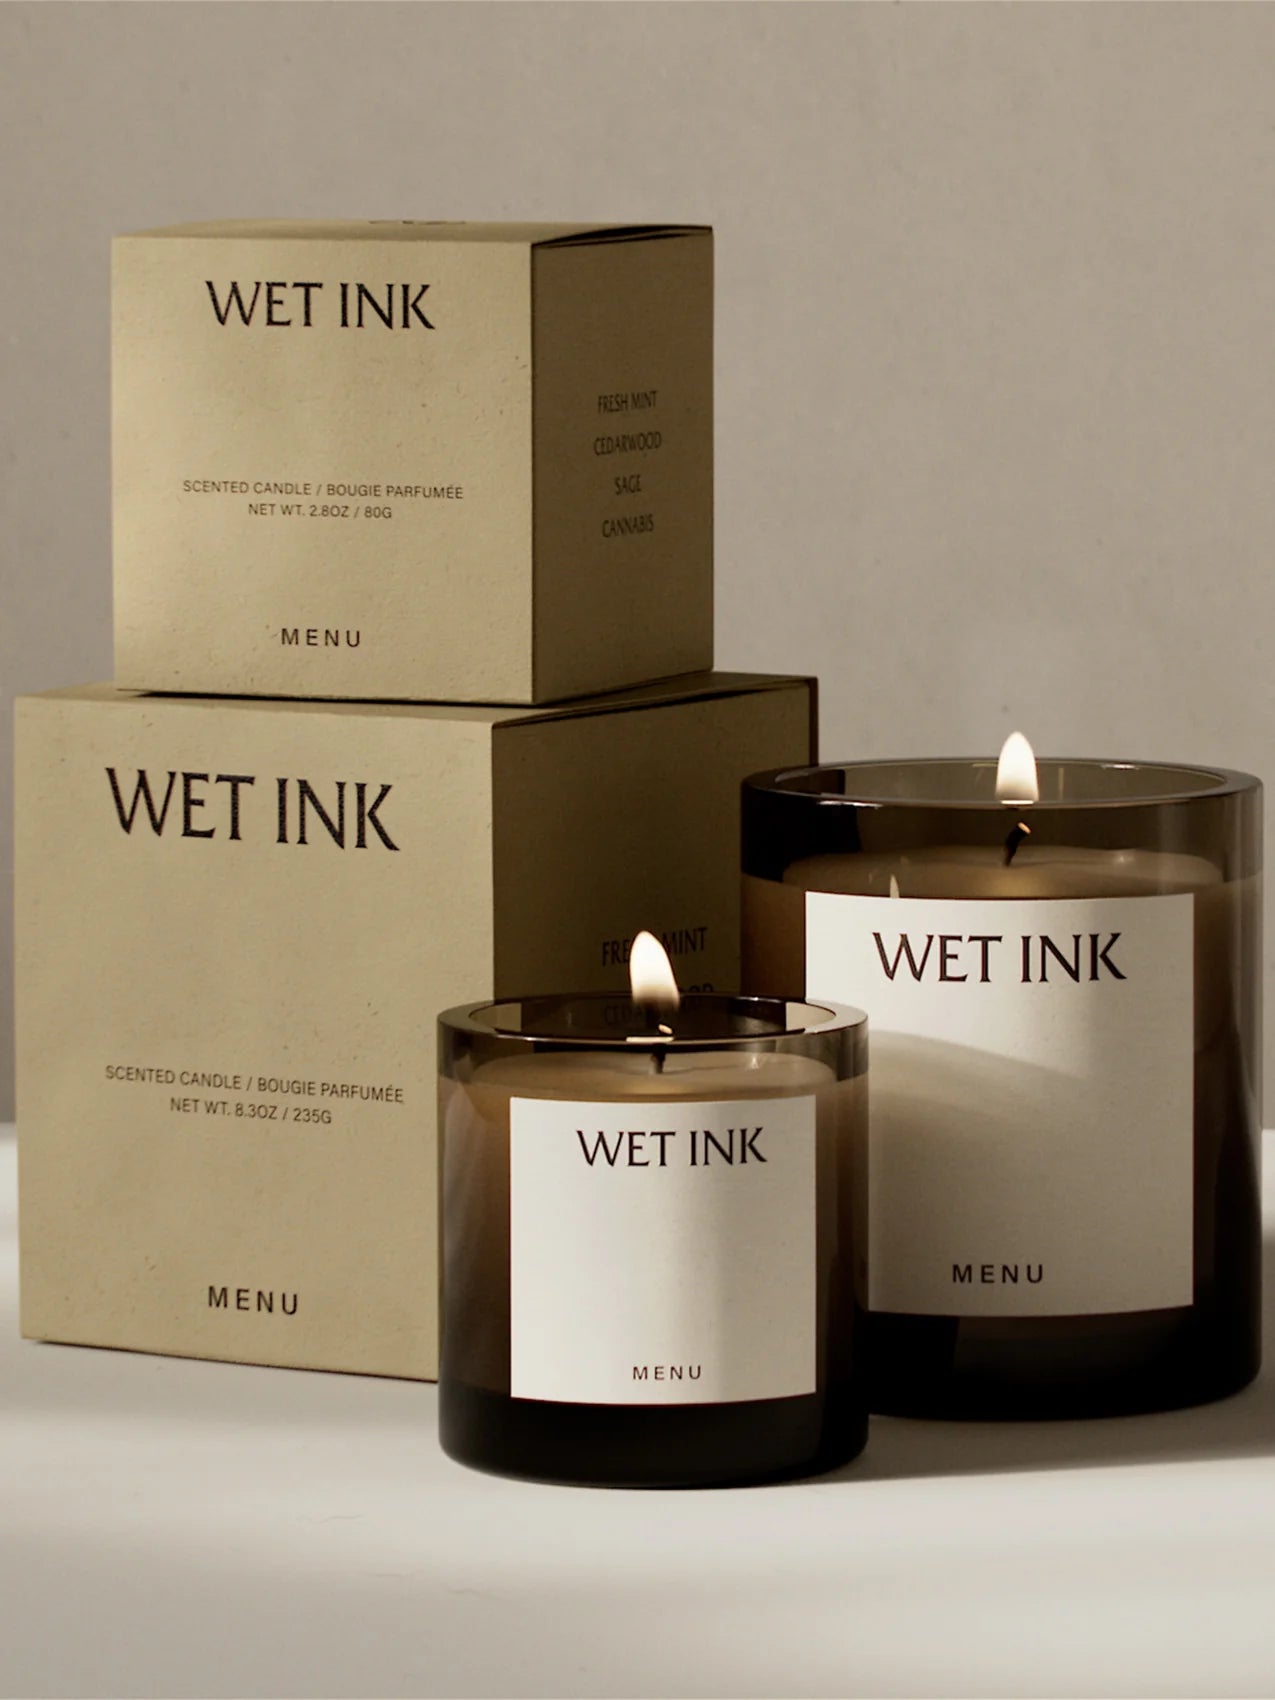 Olfacte Scented Candle in Wet Ink